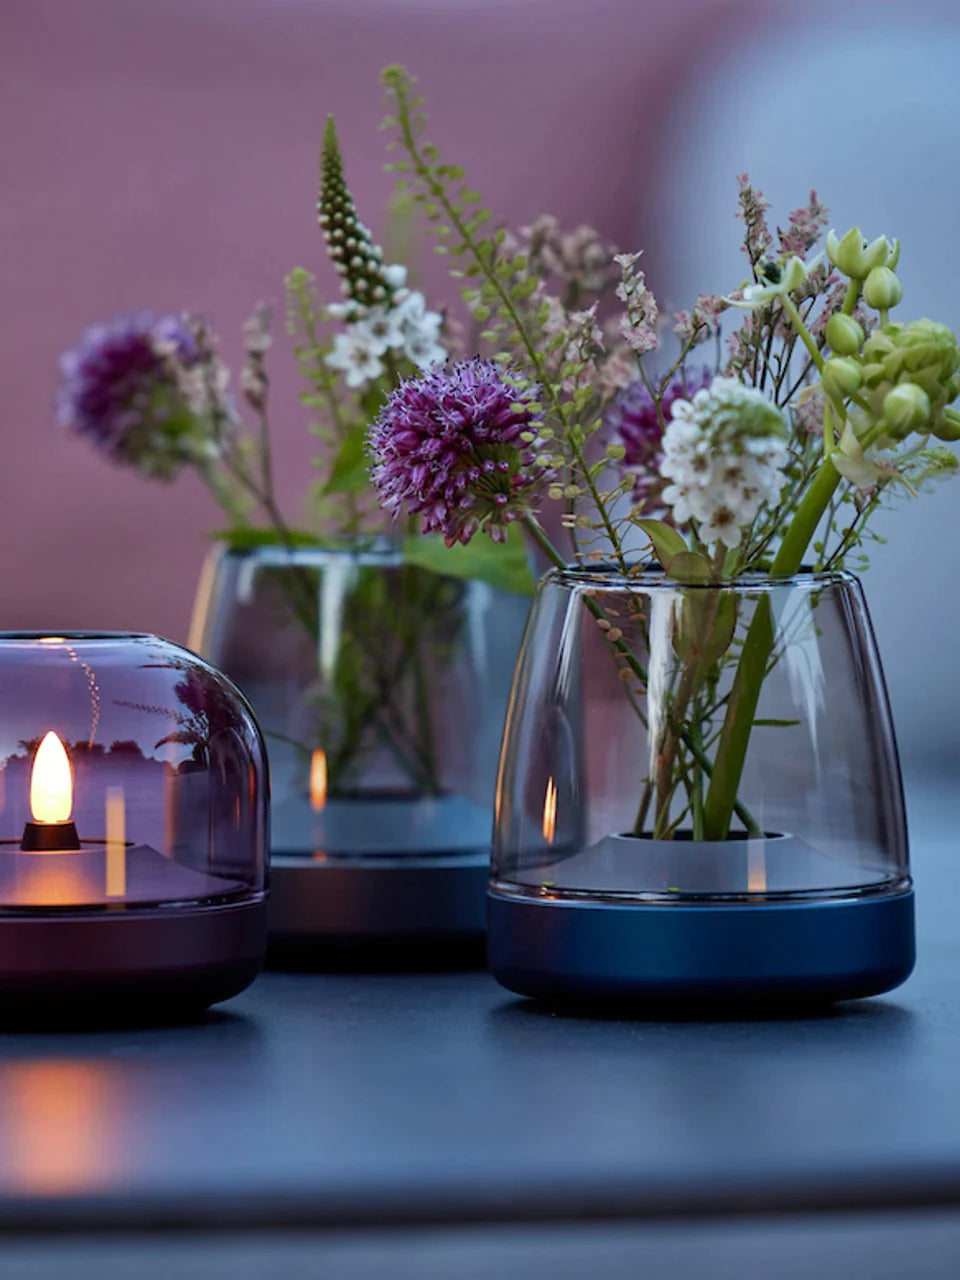 Make a statement with the Kooduu Glow 10 candle holder - a modern and safer alternative to traditional candles. Designed to pair perfectly with the rechargeable Shine LED candle, this elegant candle holder is available in a range of stylish colors to elevate your decor game. Shop now and experience the charm of candlelight!